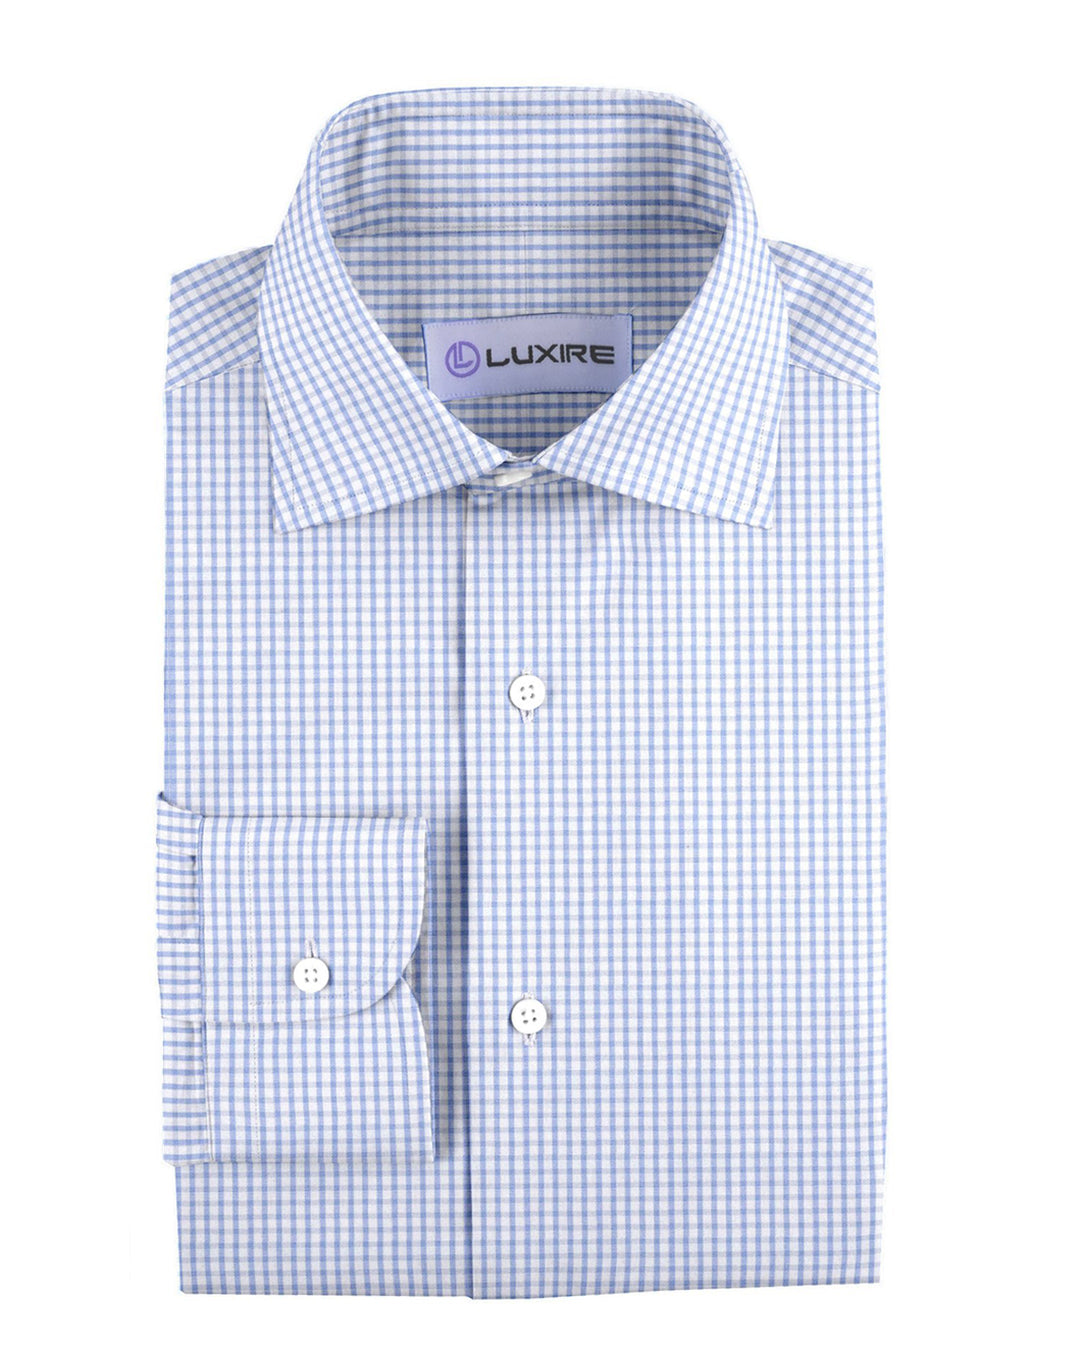 Front view of custom check shirts for men by Luxire blue pink and white